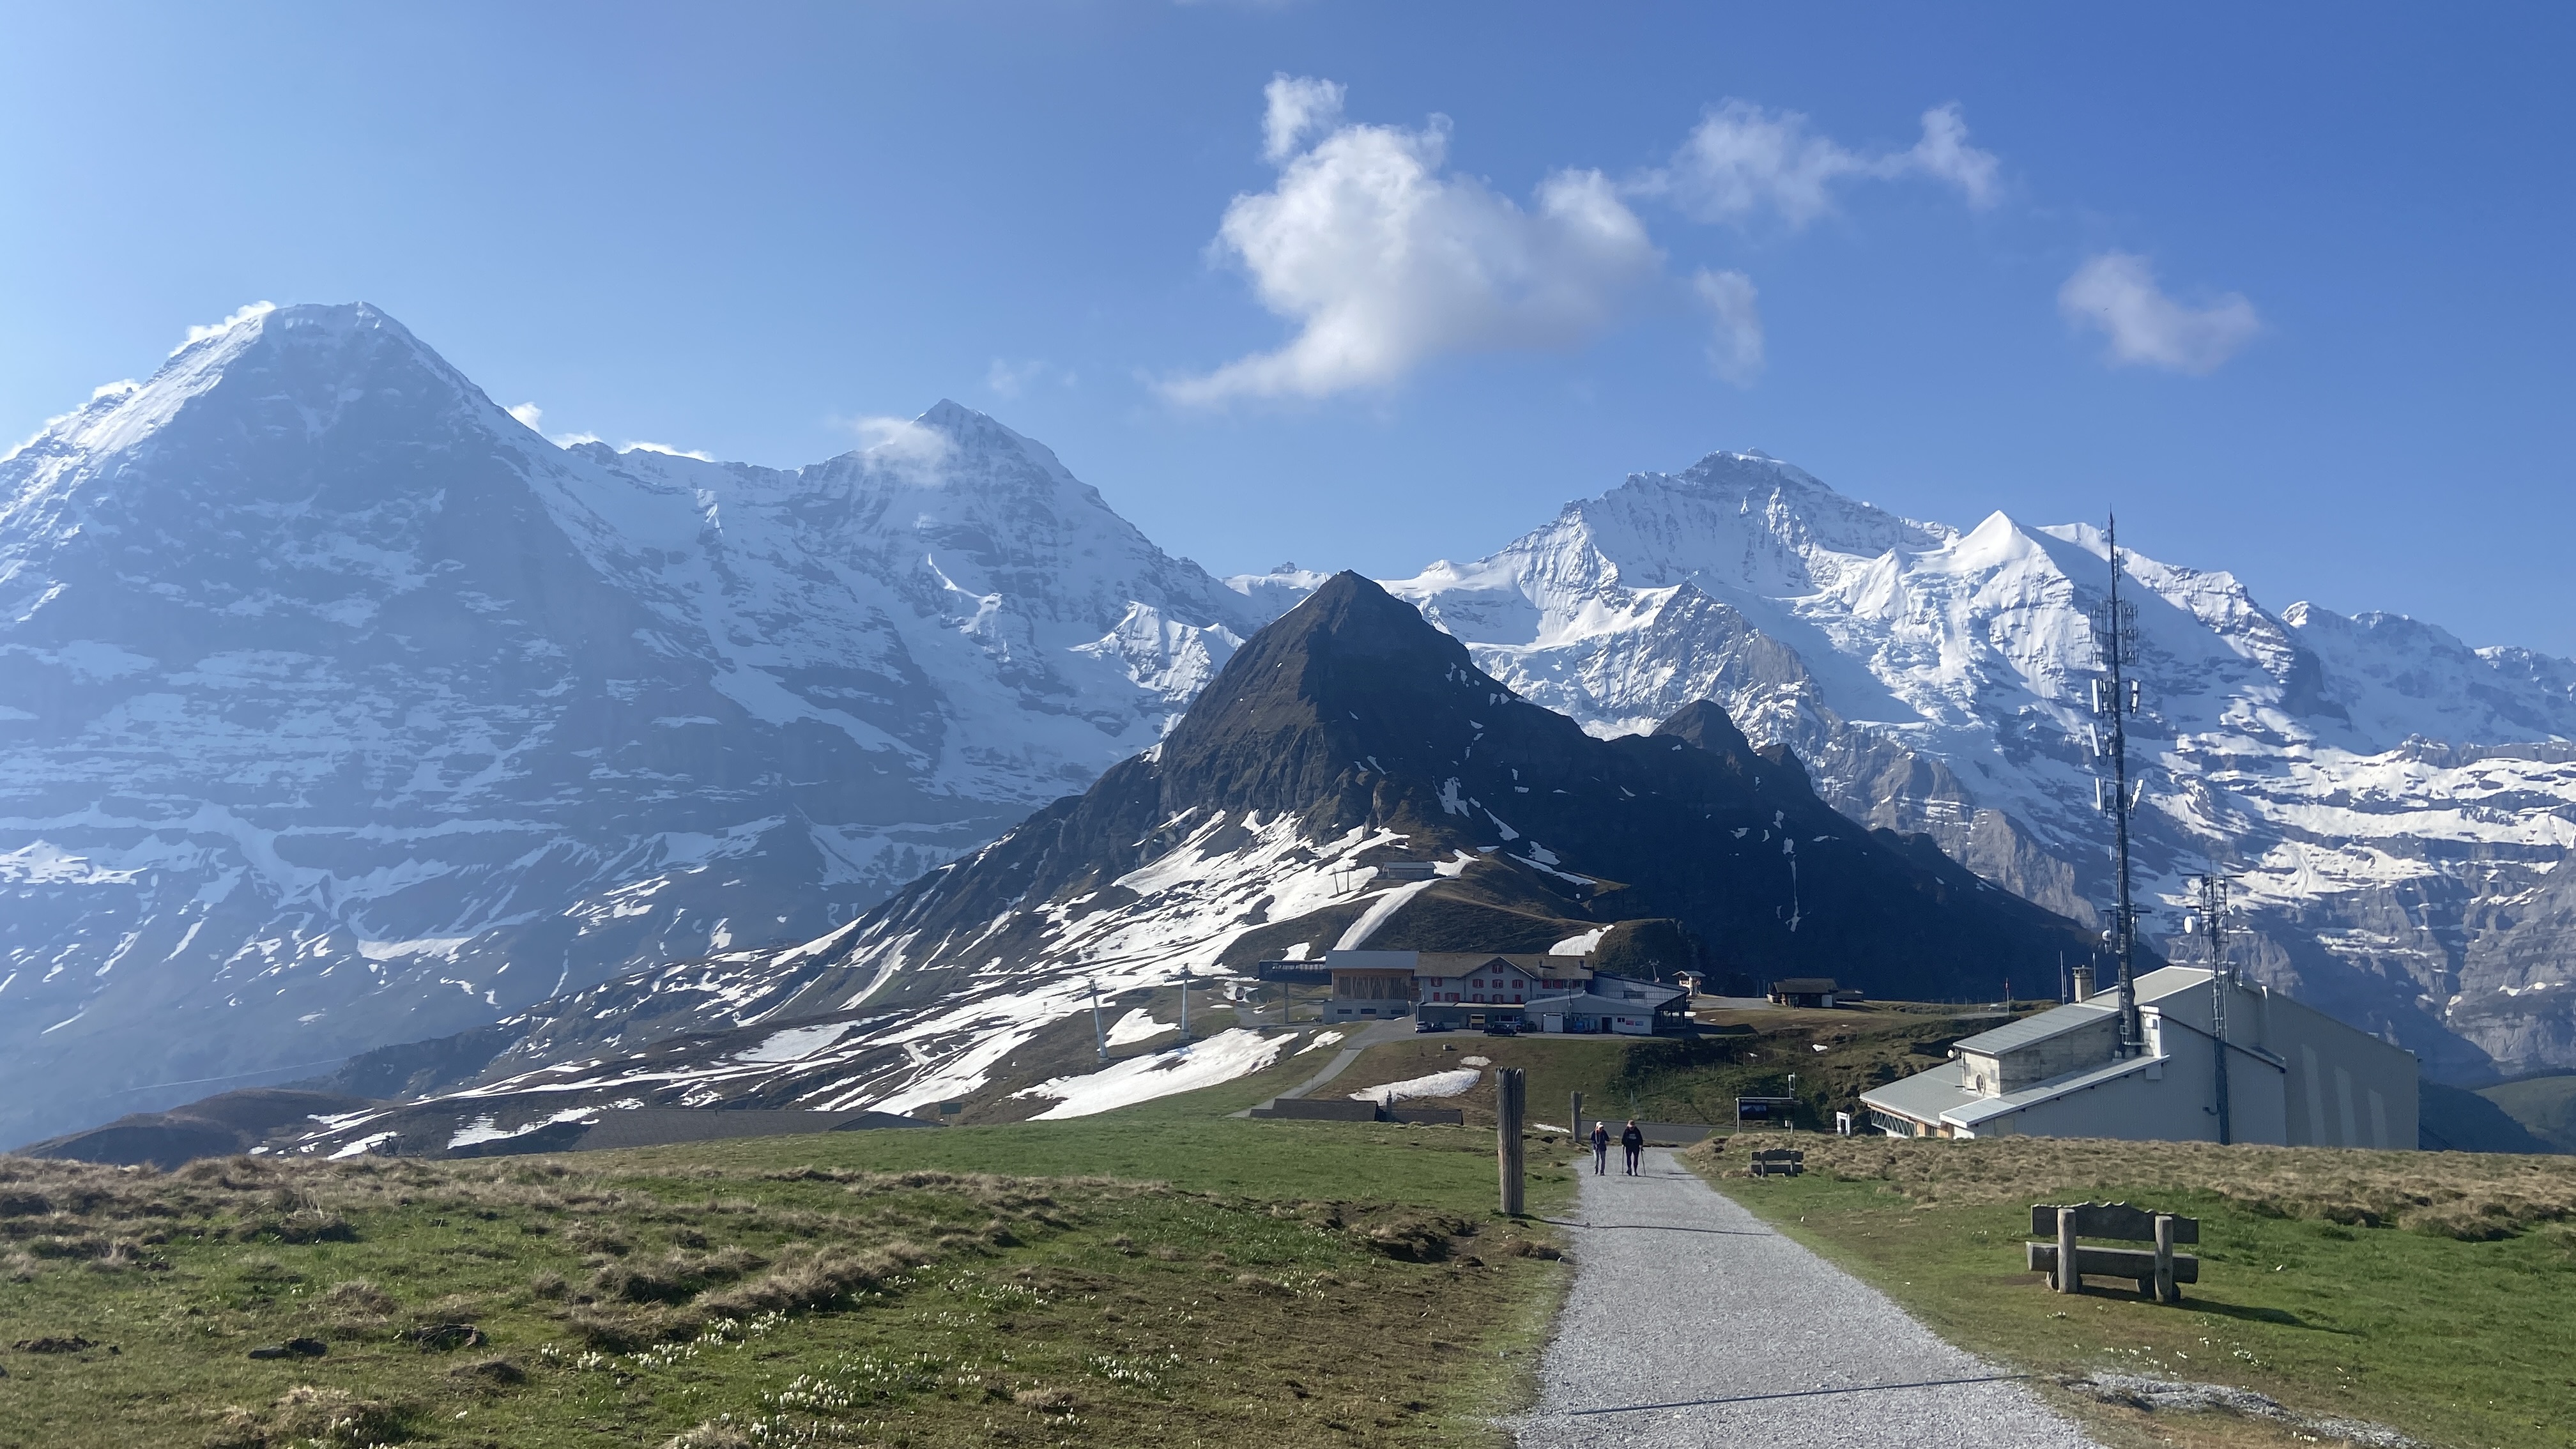 View of the Eiger, monch, and jungfrau from mannlichen